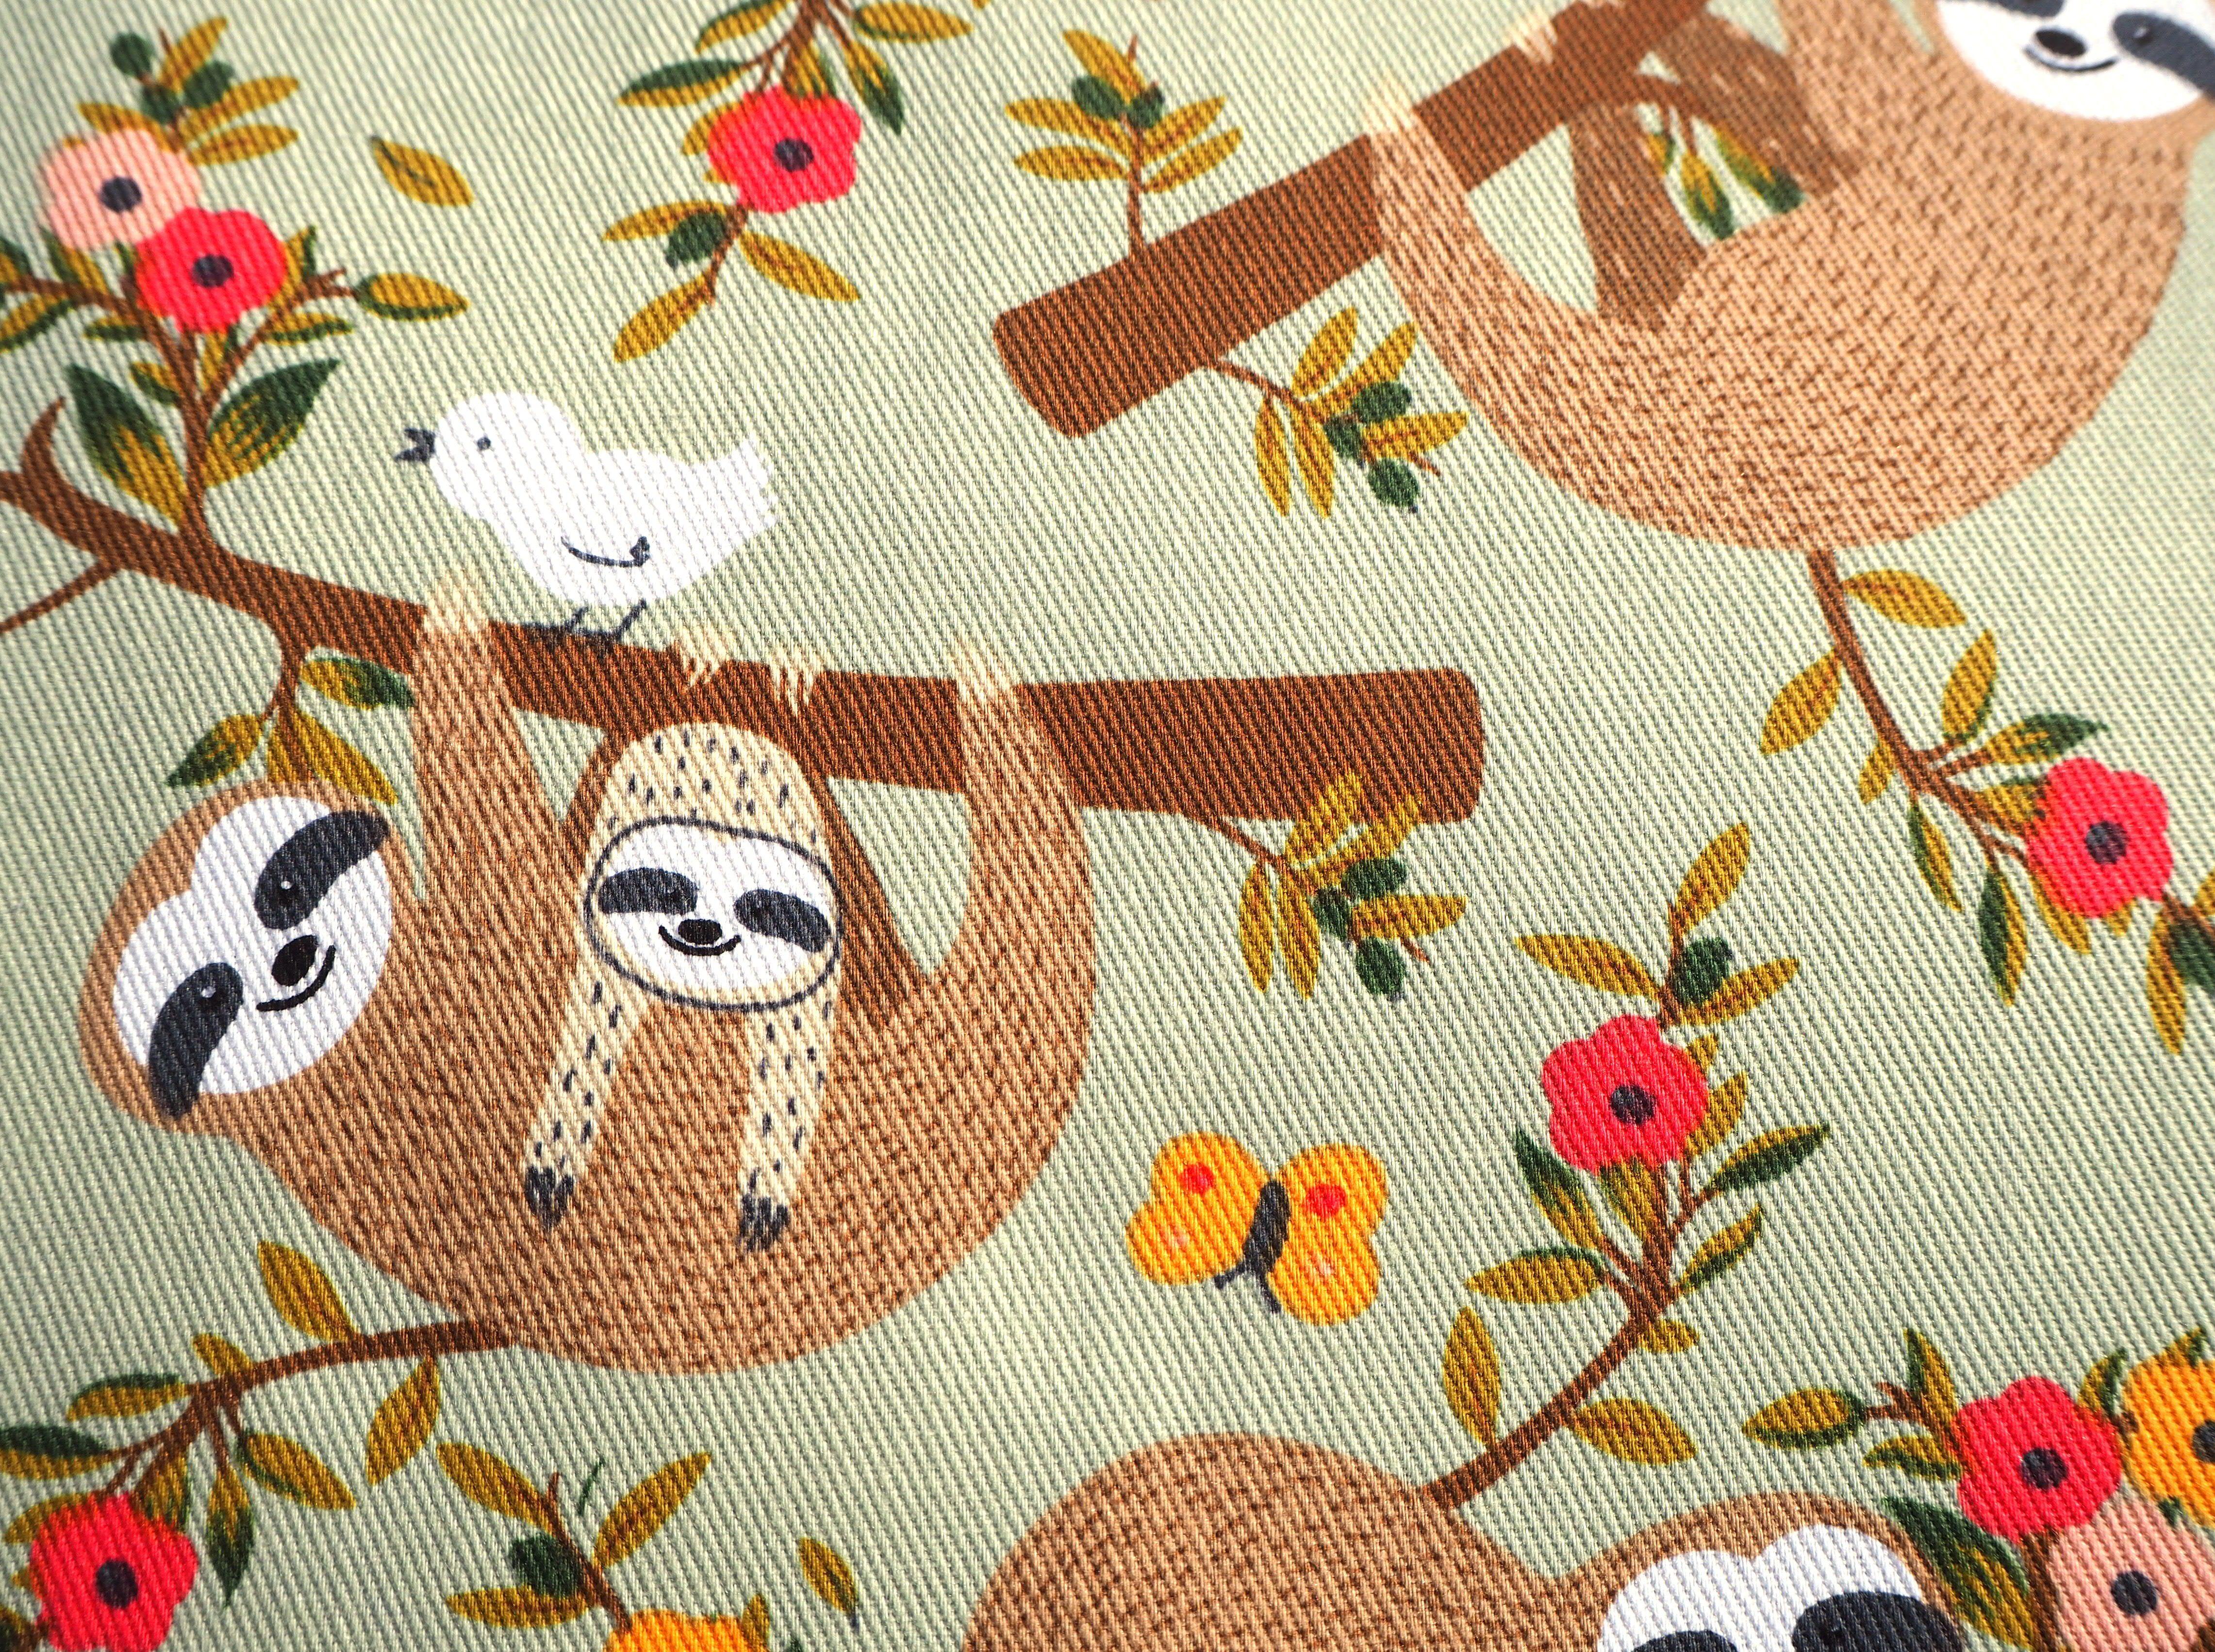 Hanging Around Sloth Family images on soft green background, 100% cotton fabric